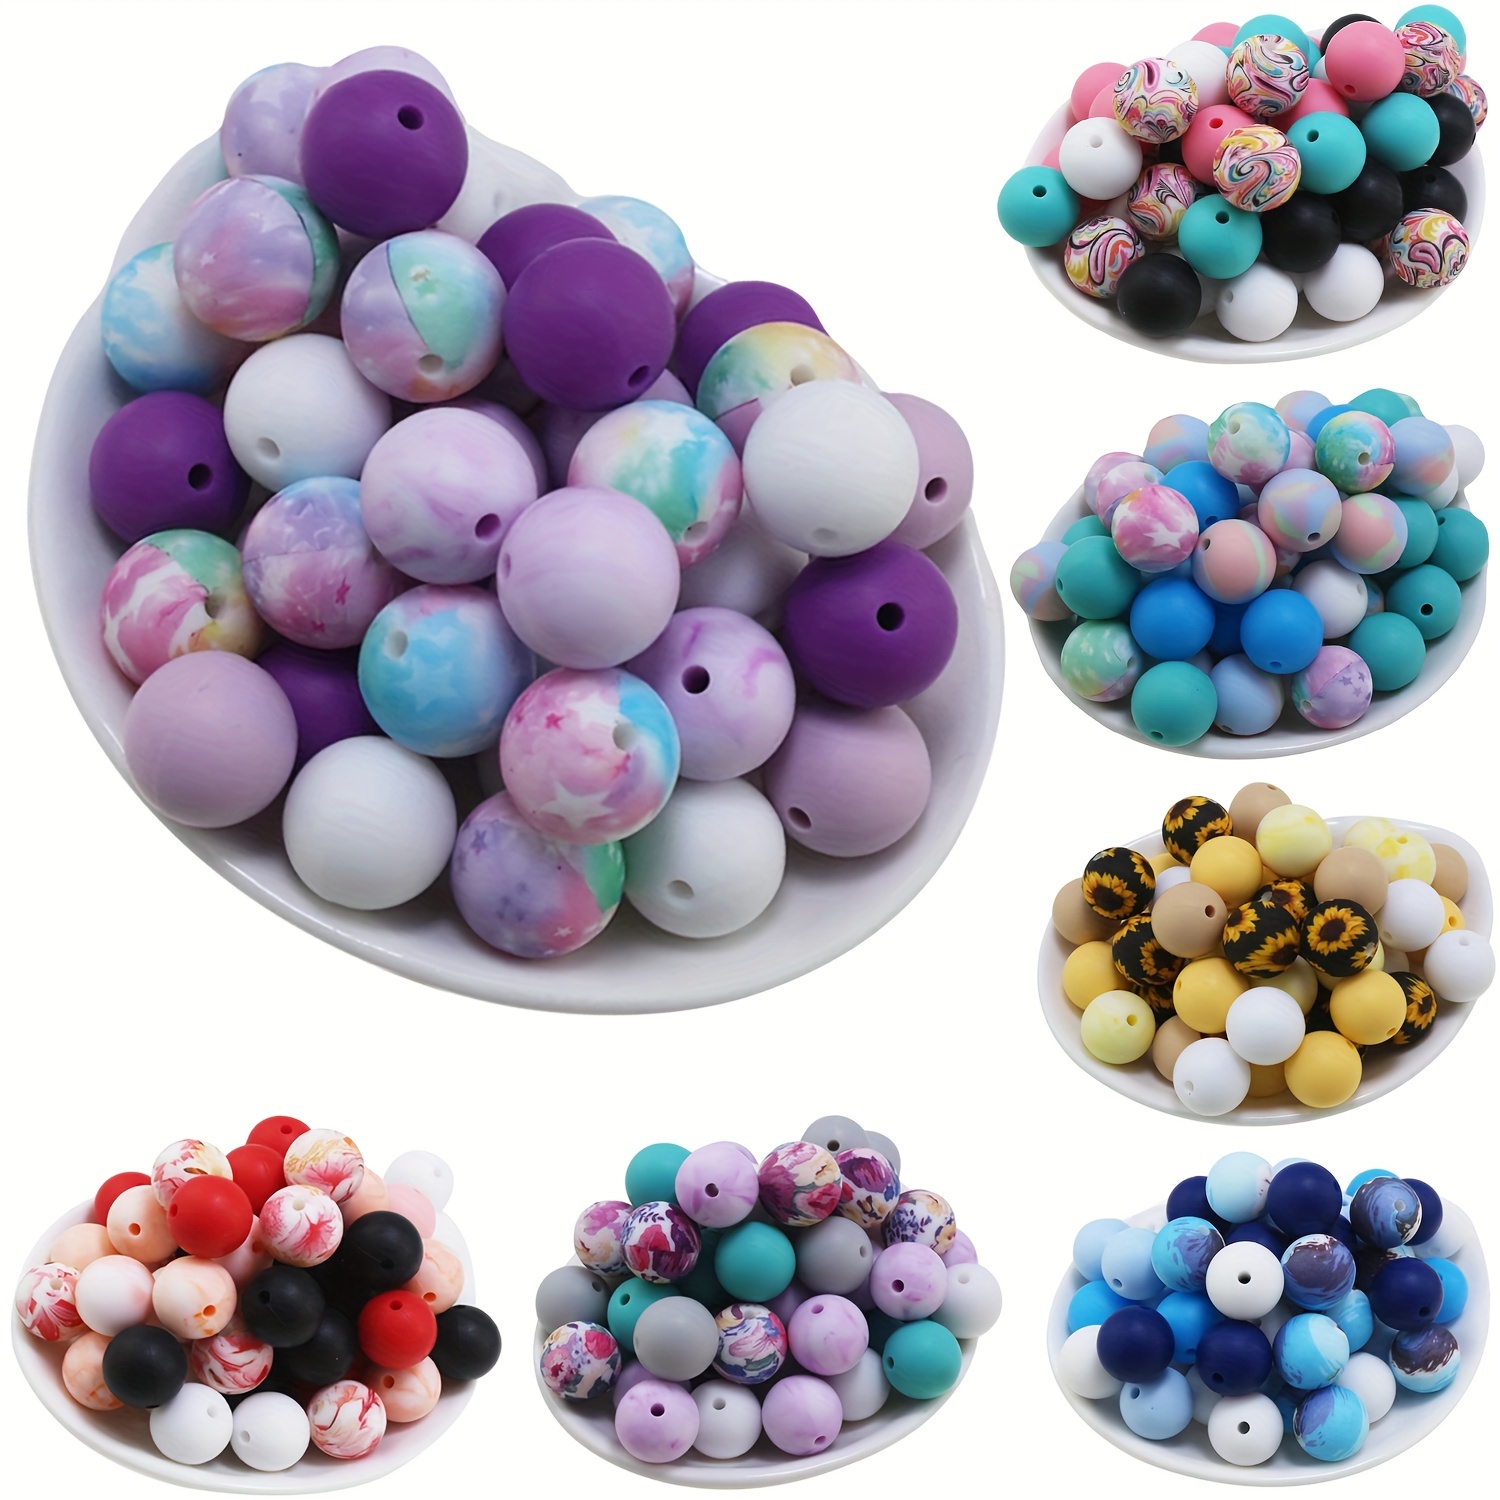 Crtiin 15 Pcs Beadable Pens Valentines Assorted Bead Pens DIY Ballpoint  Beaded Pens with 60 Charm Beads Pendants Beads Spacer Bead 15 Pen Packaging